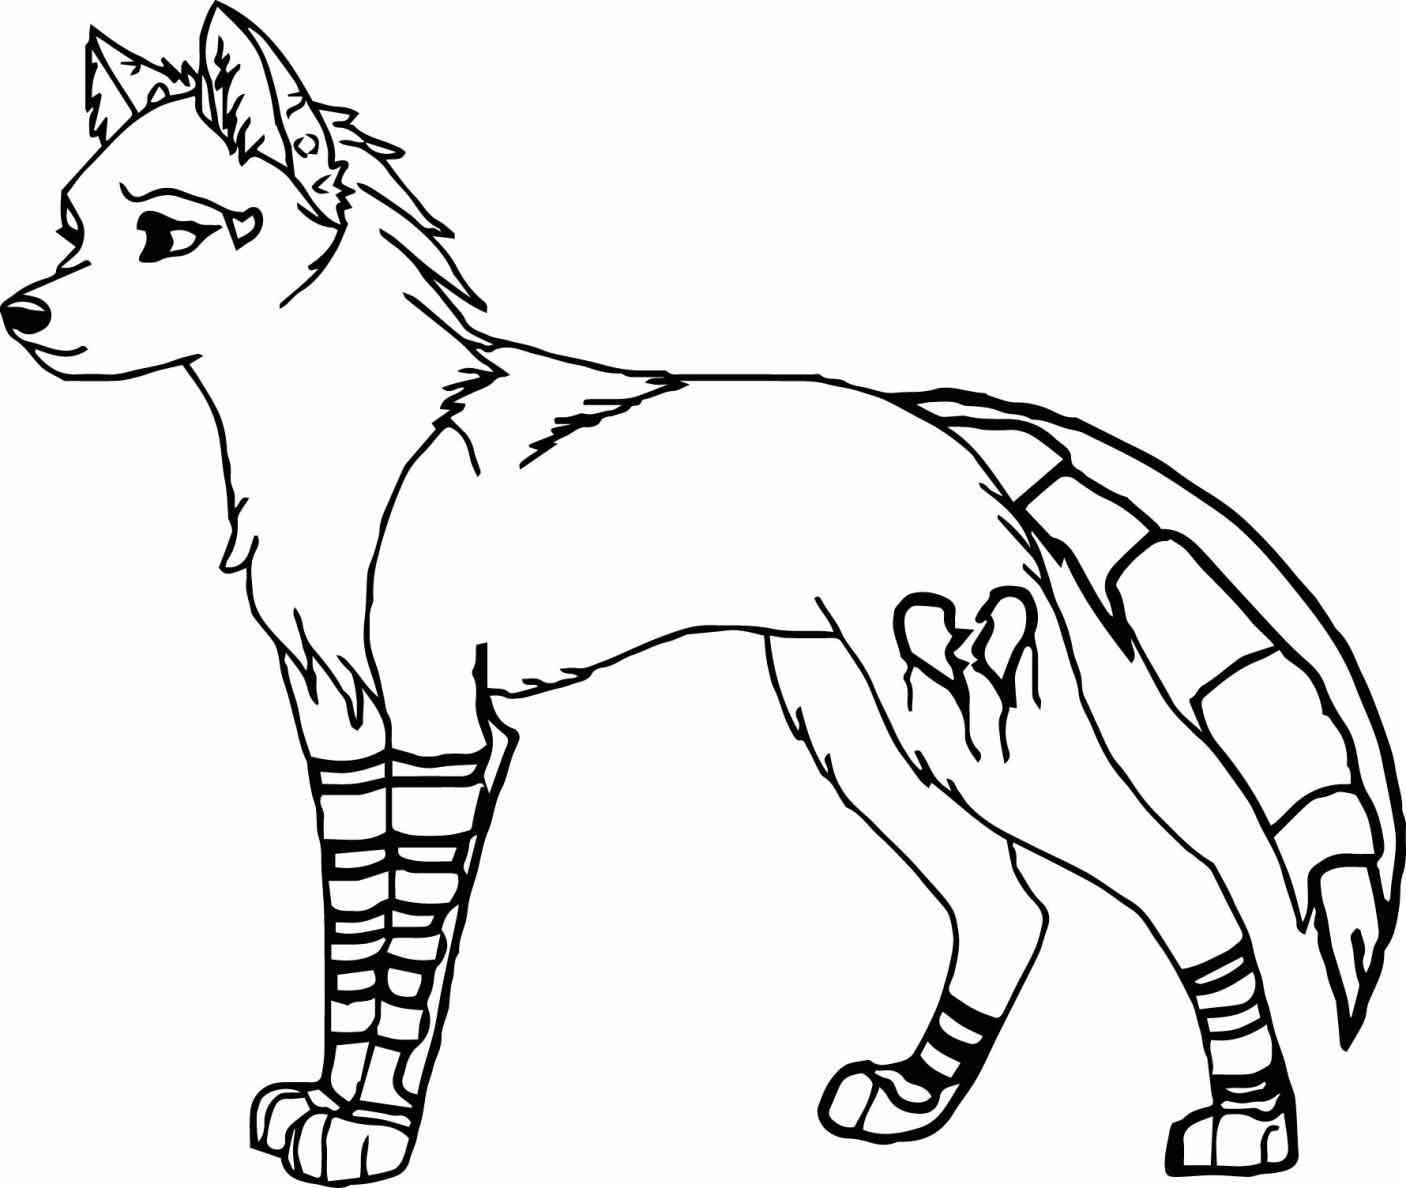 Coloring Pages Of Baby Wolves at Free